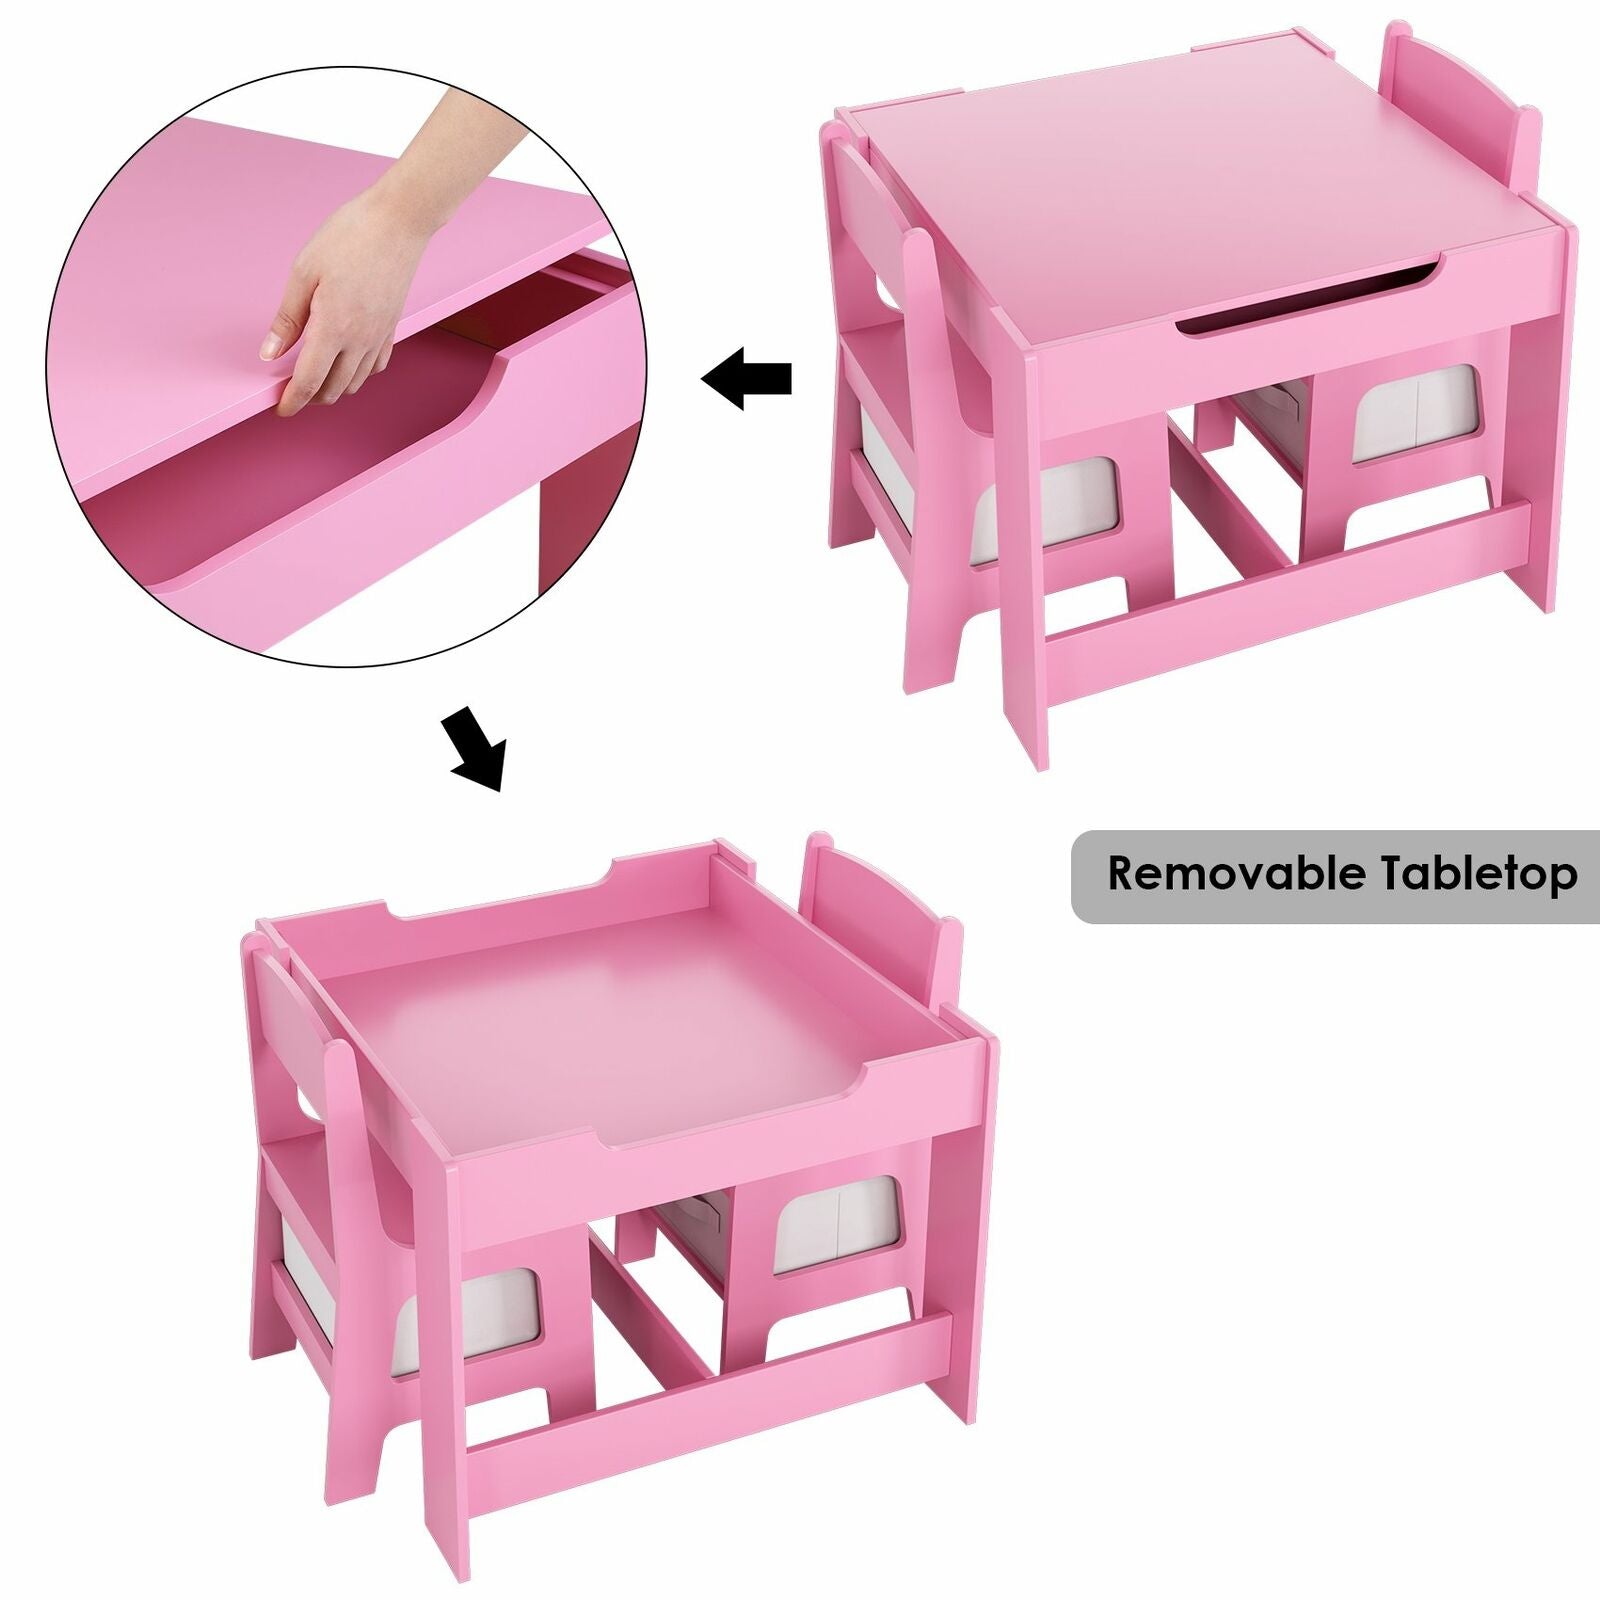 Kids Table and Chairs Set Toddler Child Wooden Toy Activity Desk Sets